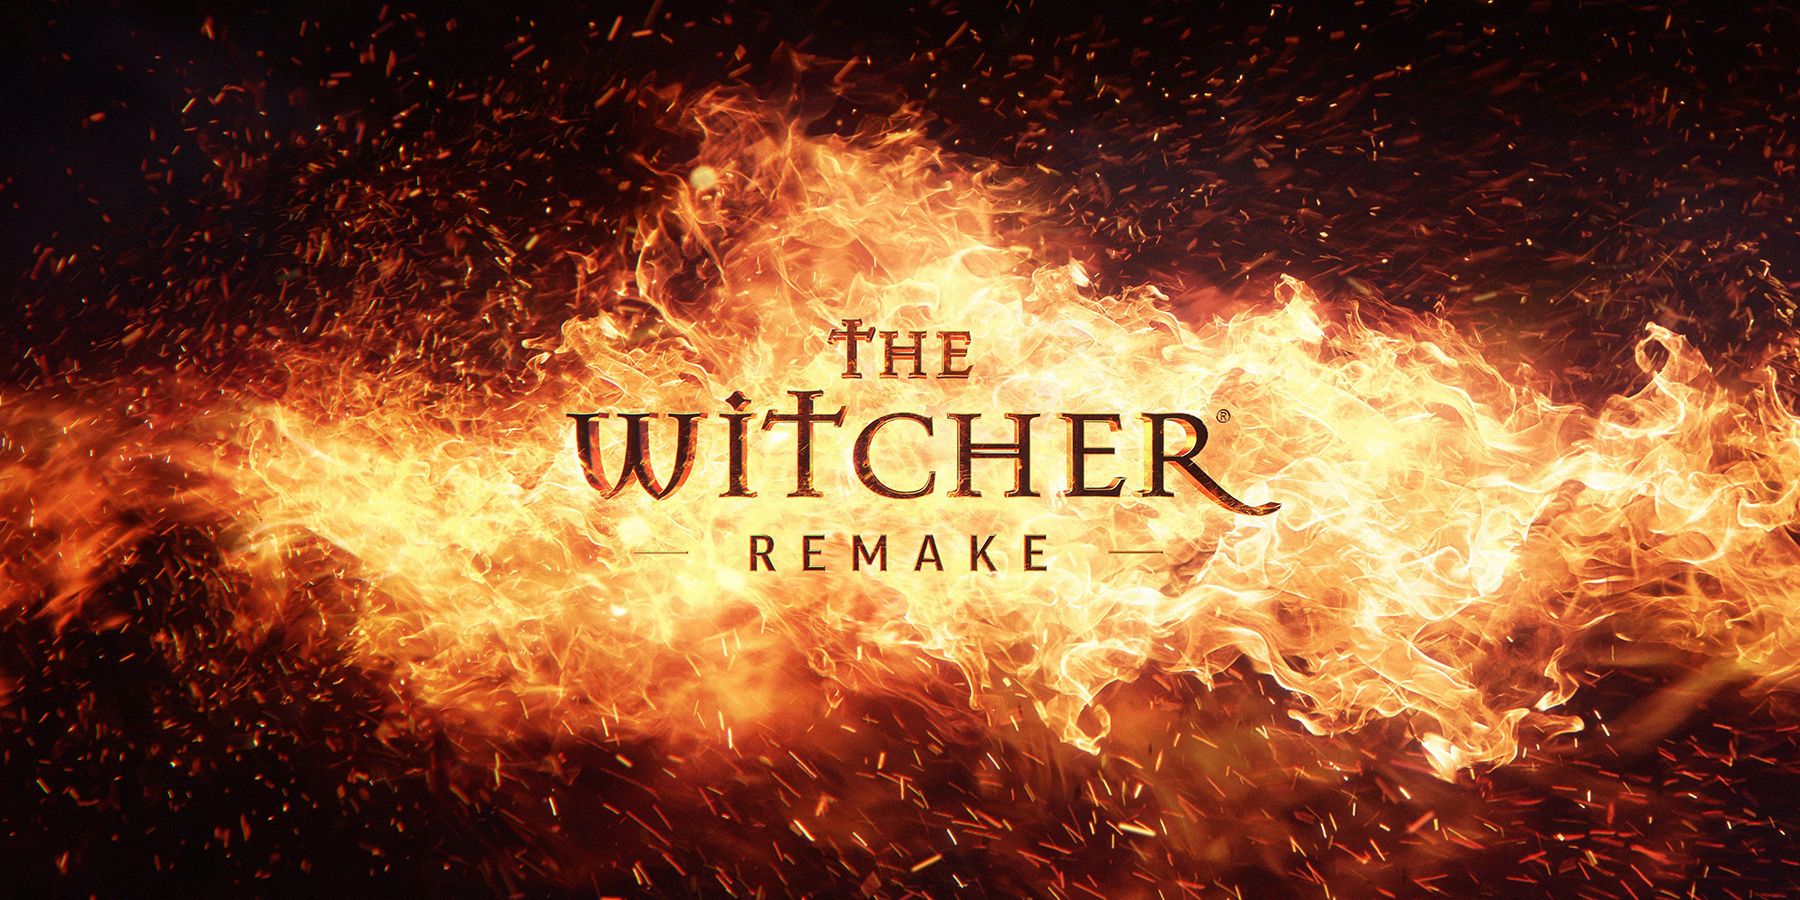 the witcher remake will cut or improve bad and outdated features